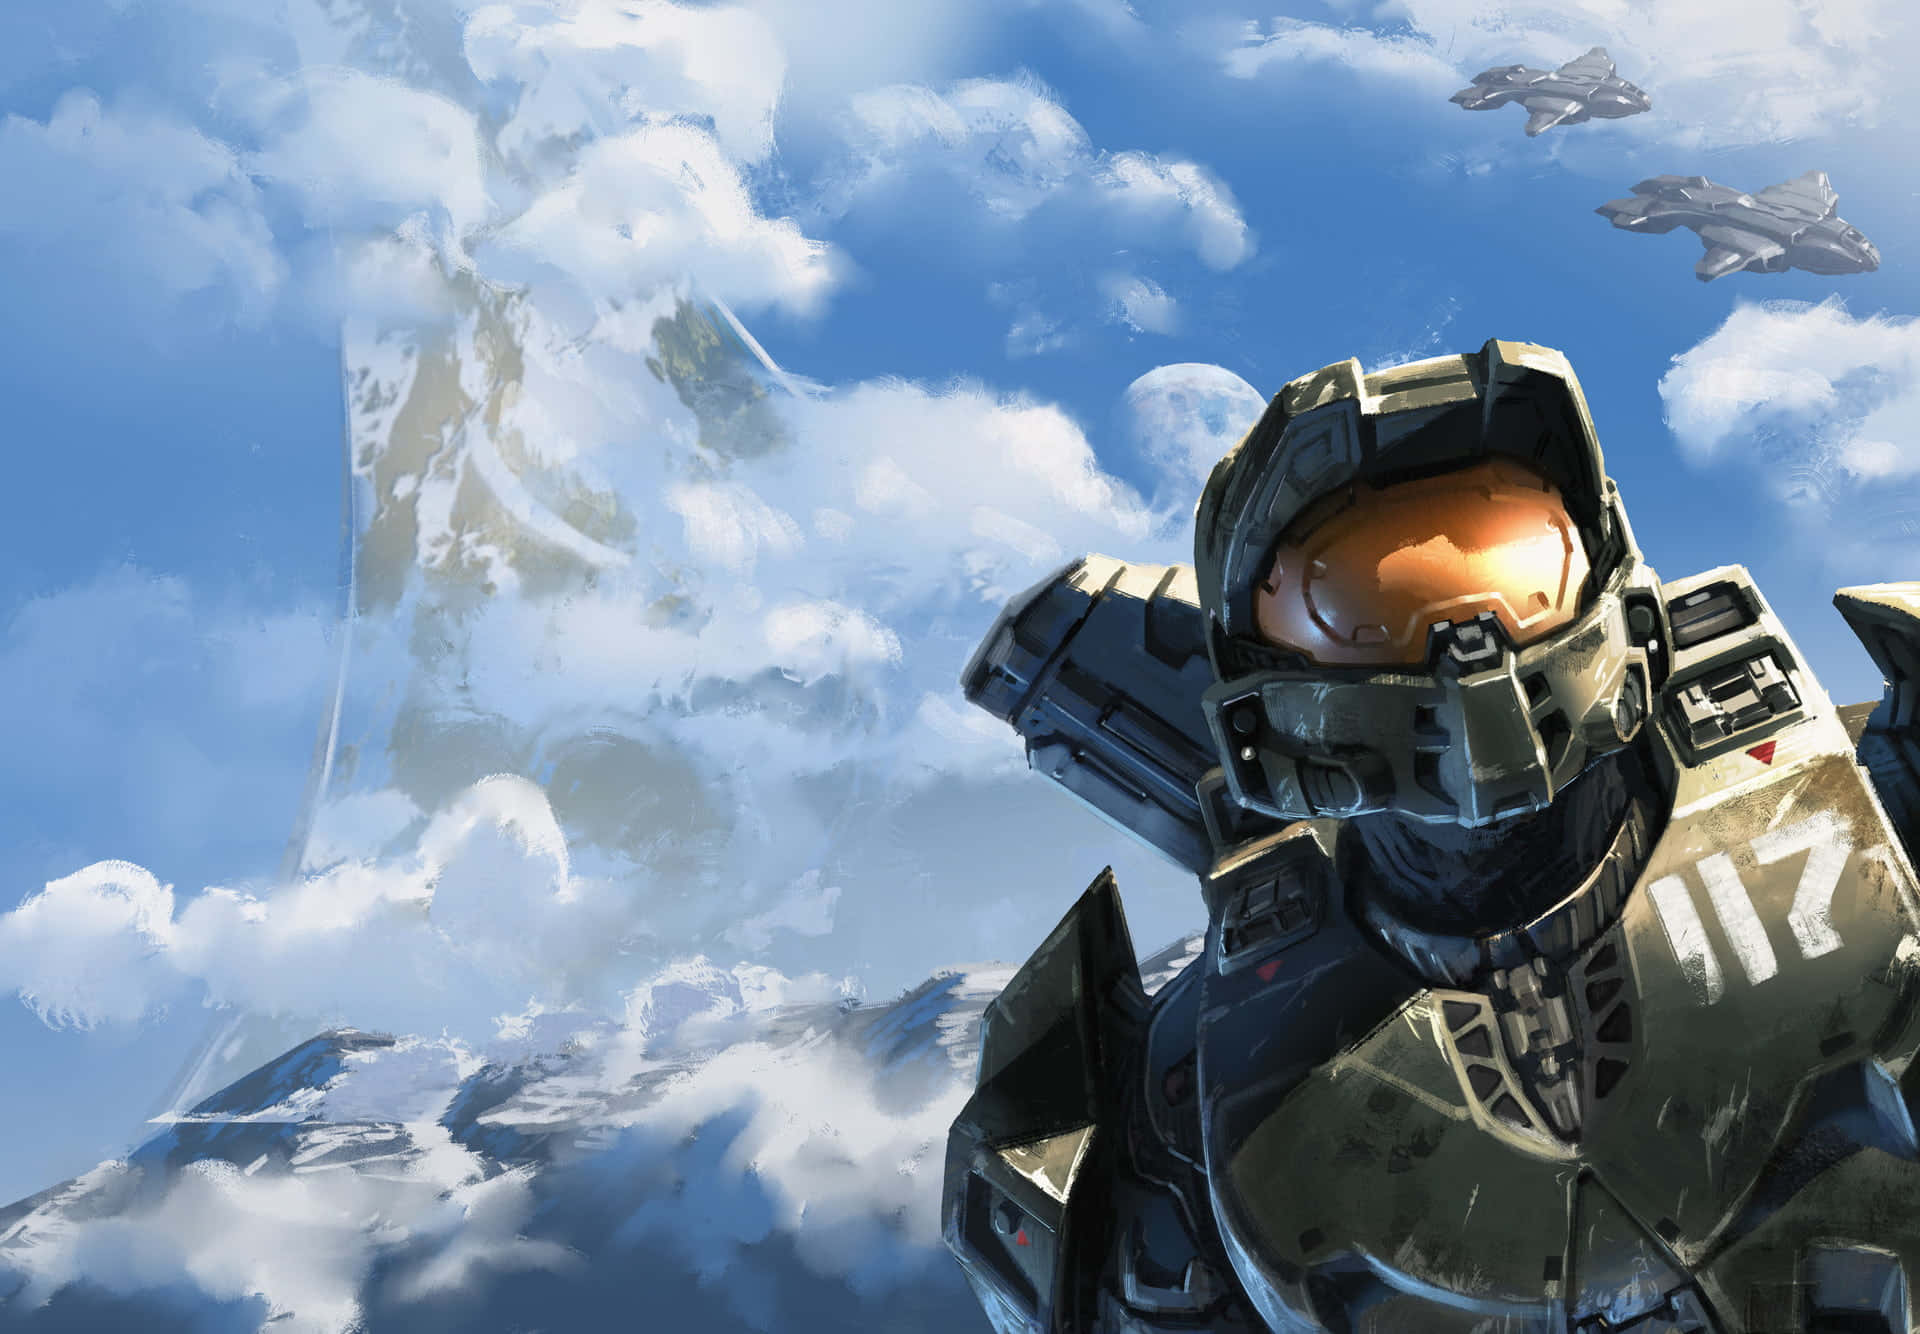 Step into the world of the Halo universe